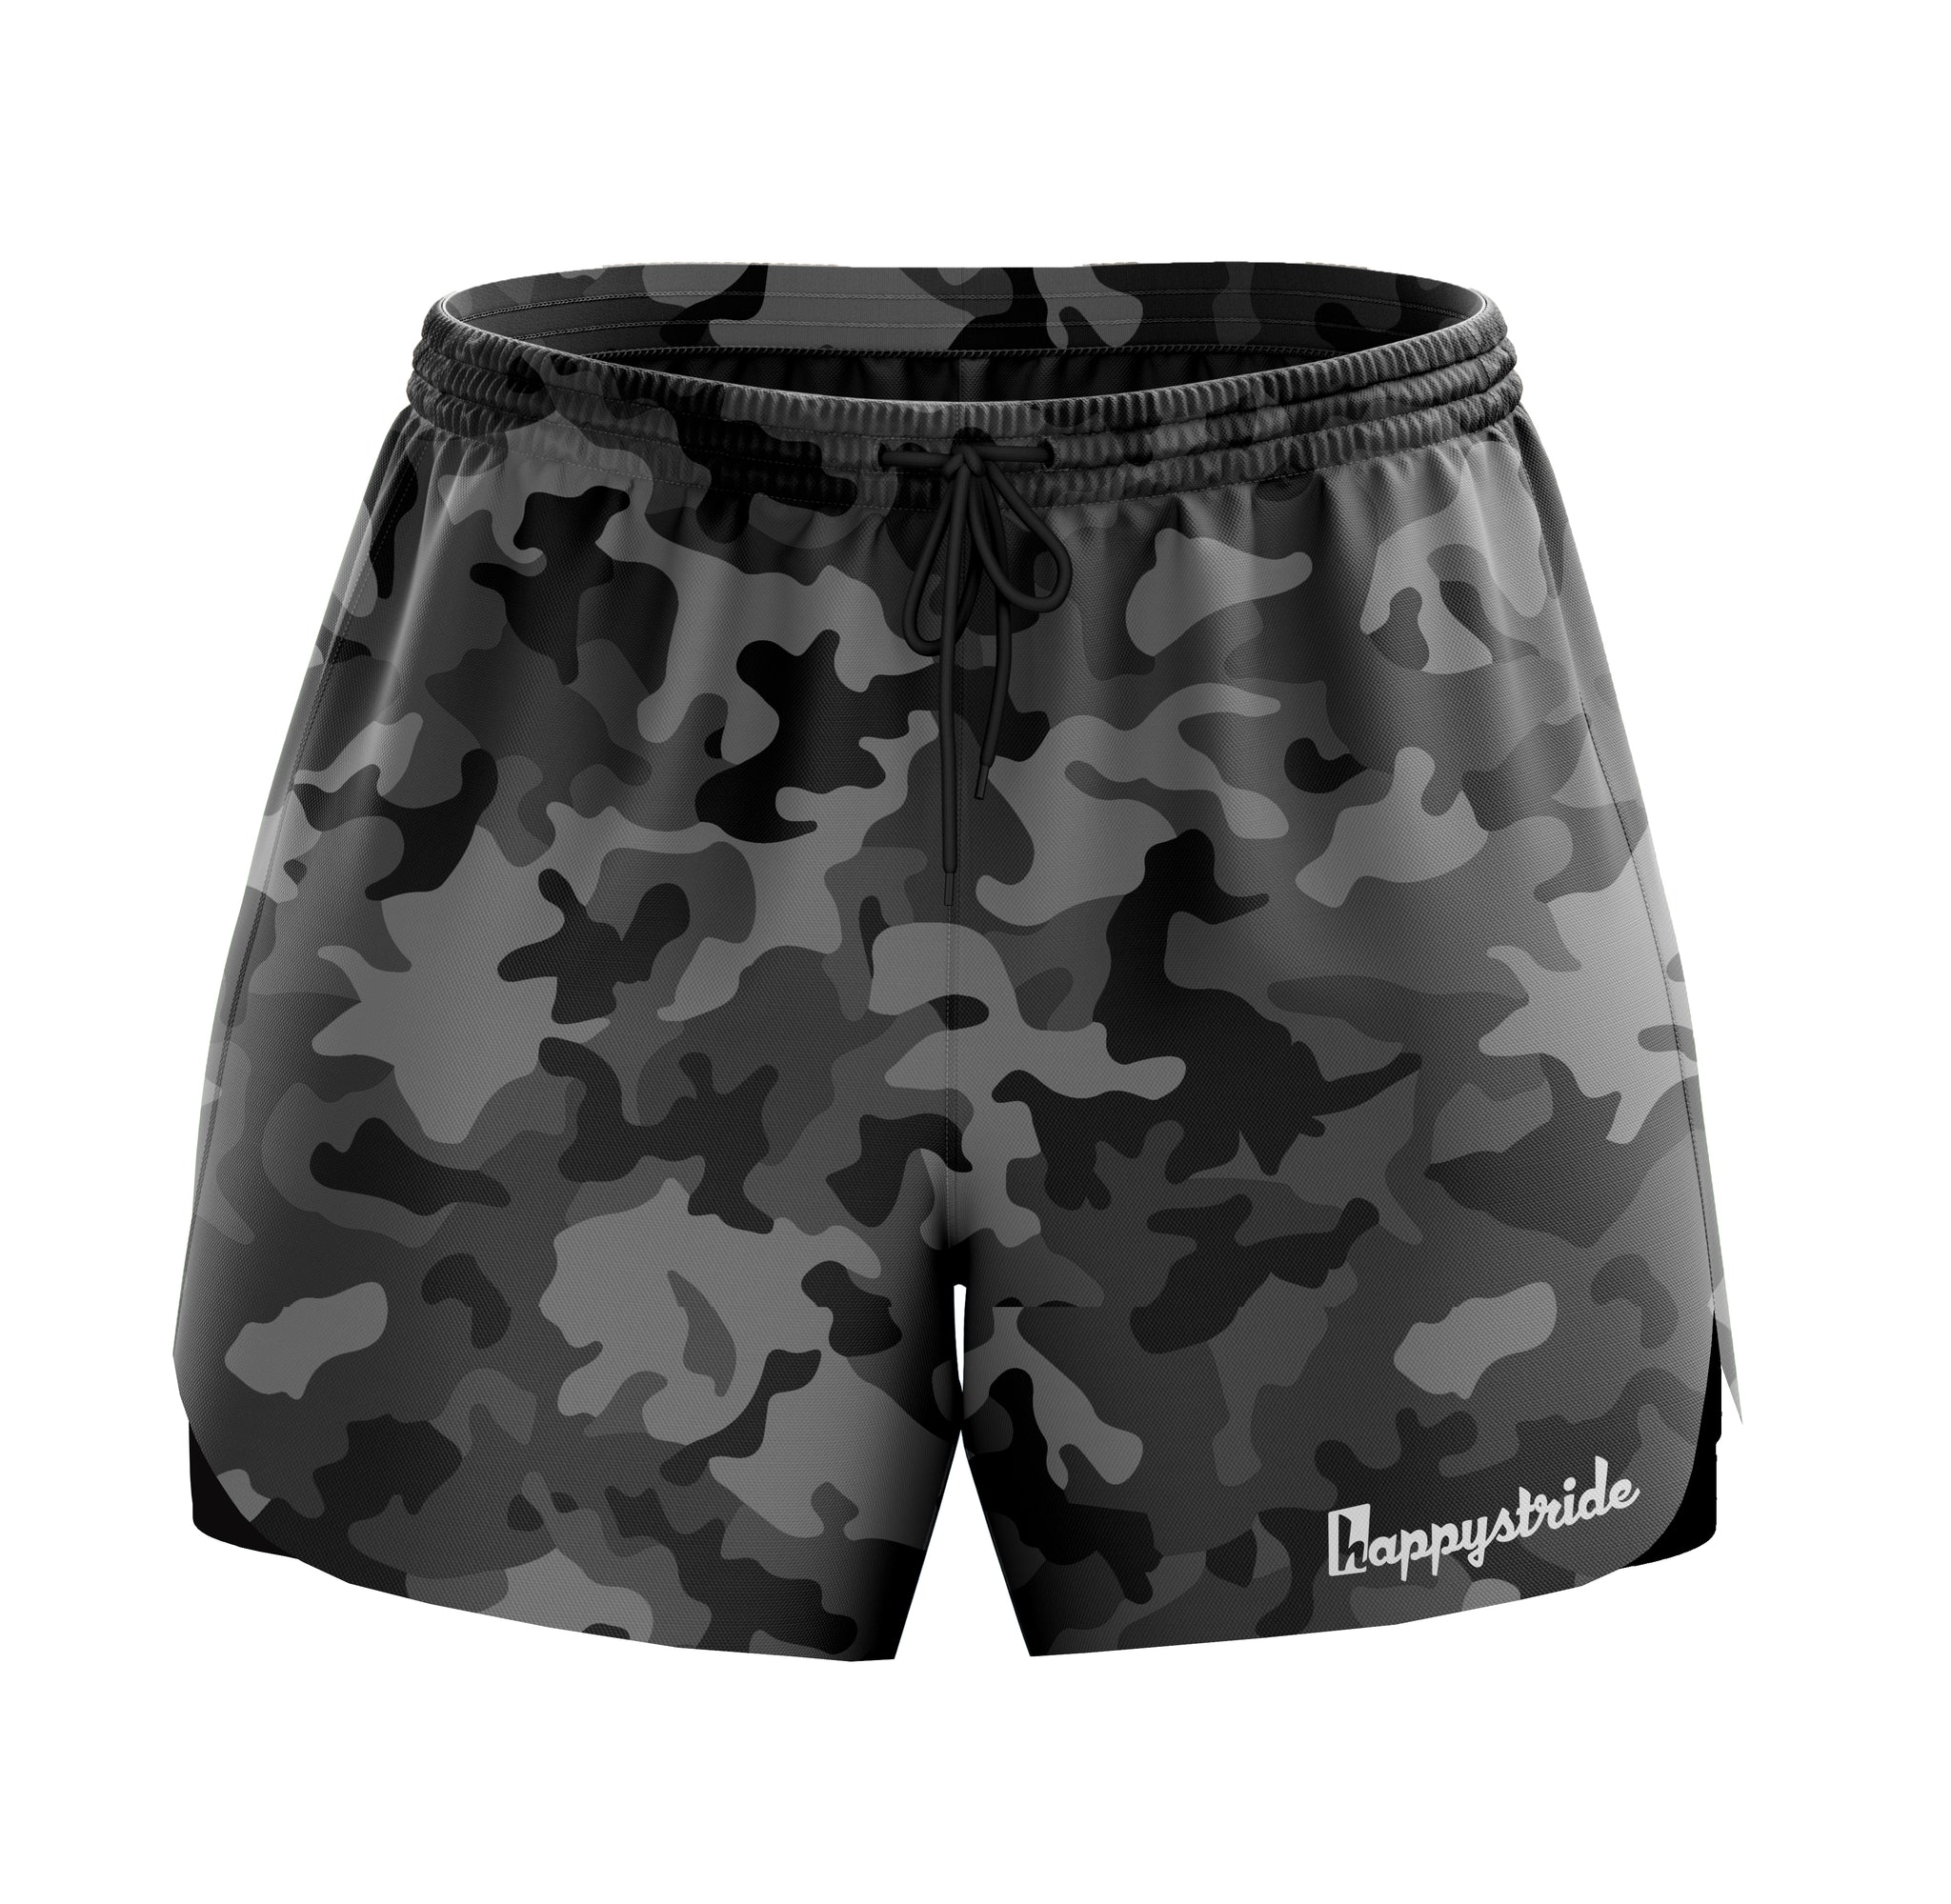 Can't see you'' cool colourful fun unisex 2-in-1 running & fitness grey camouflage  shorts – Happystride